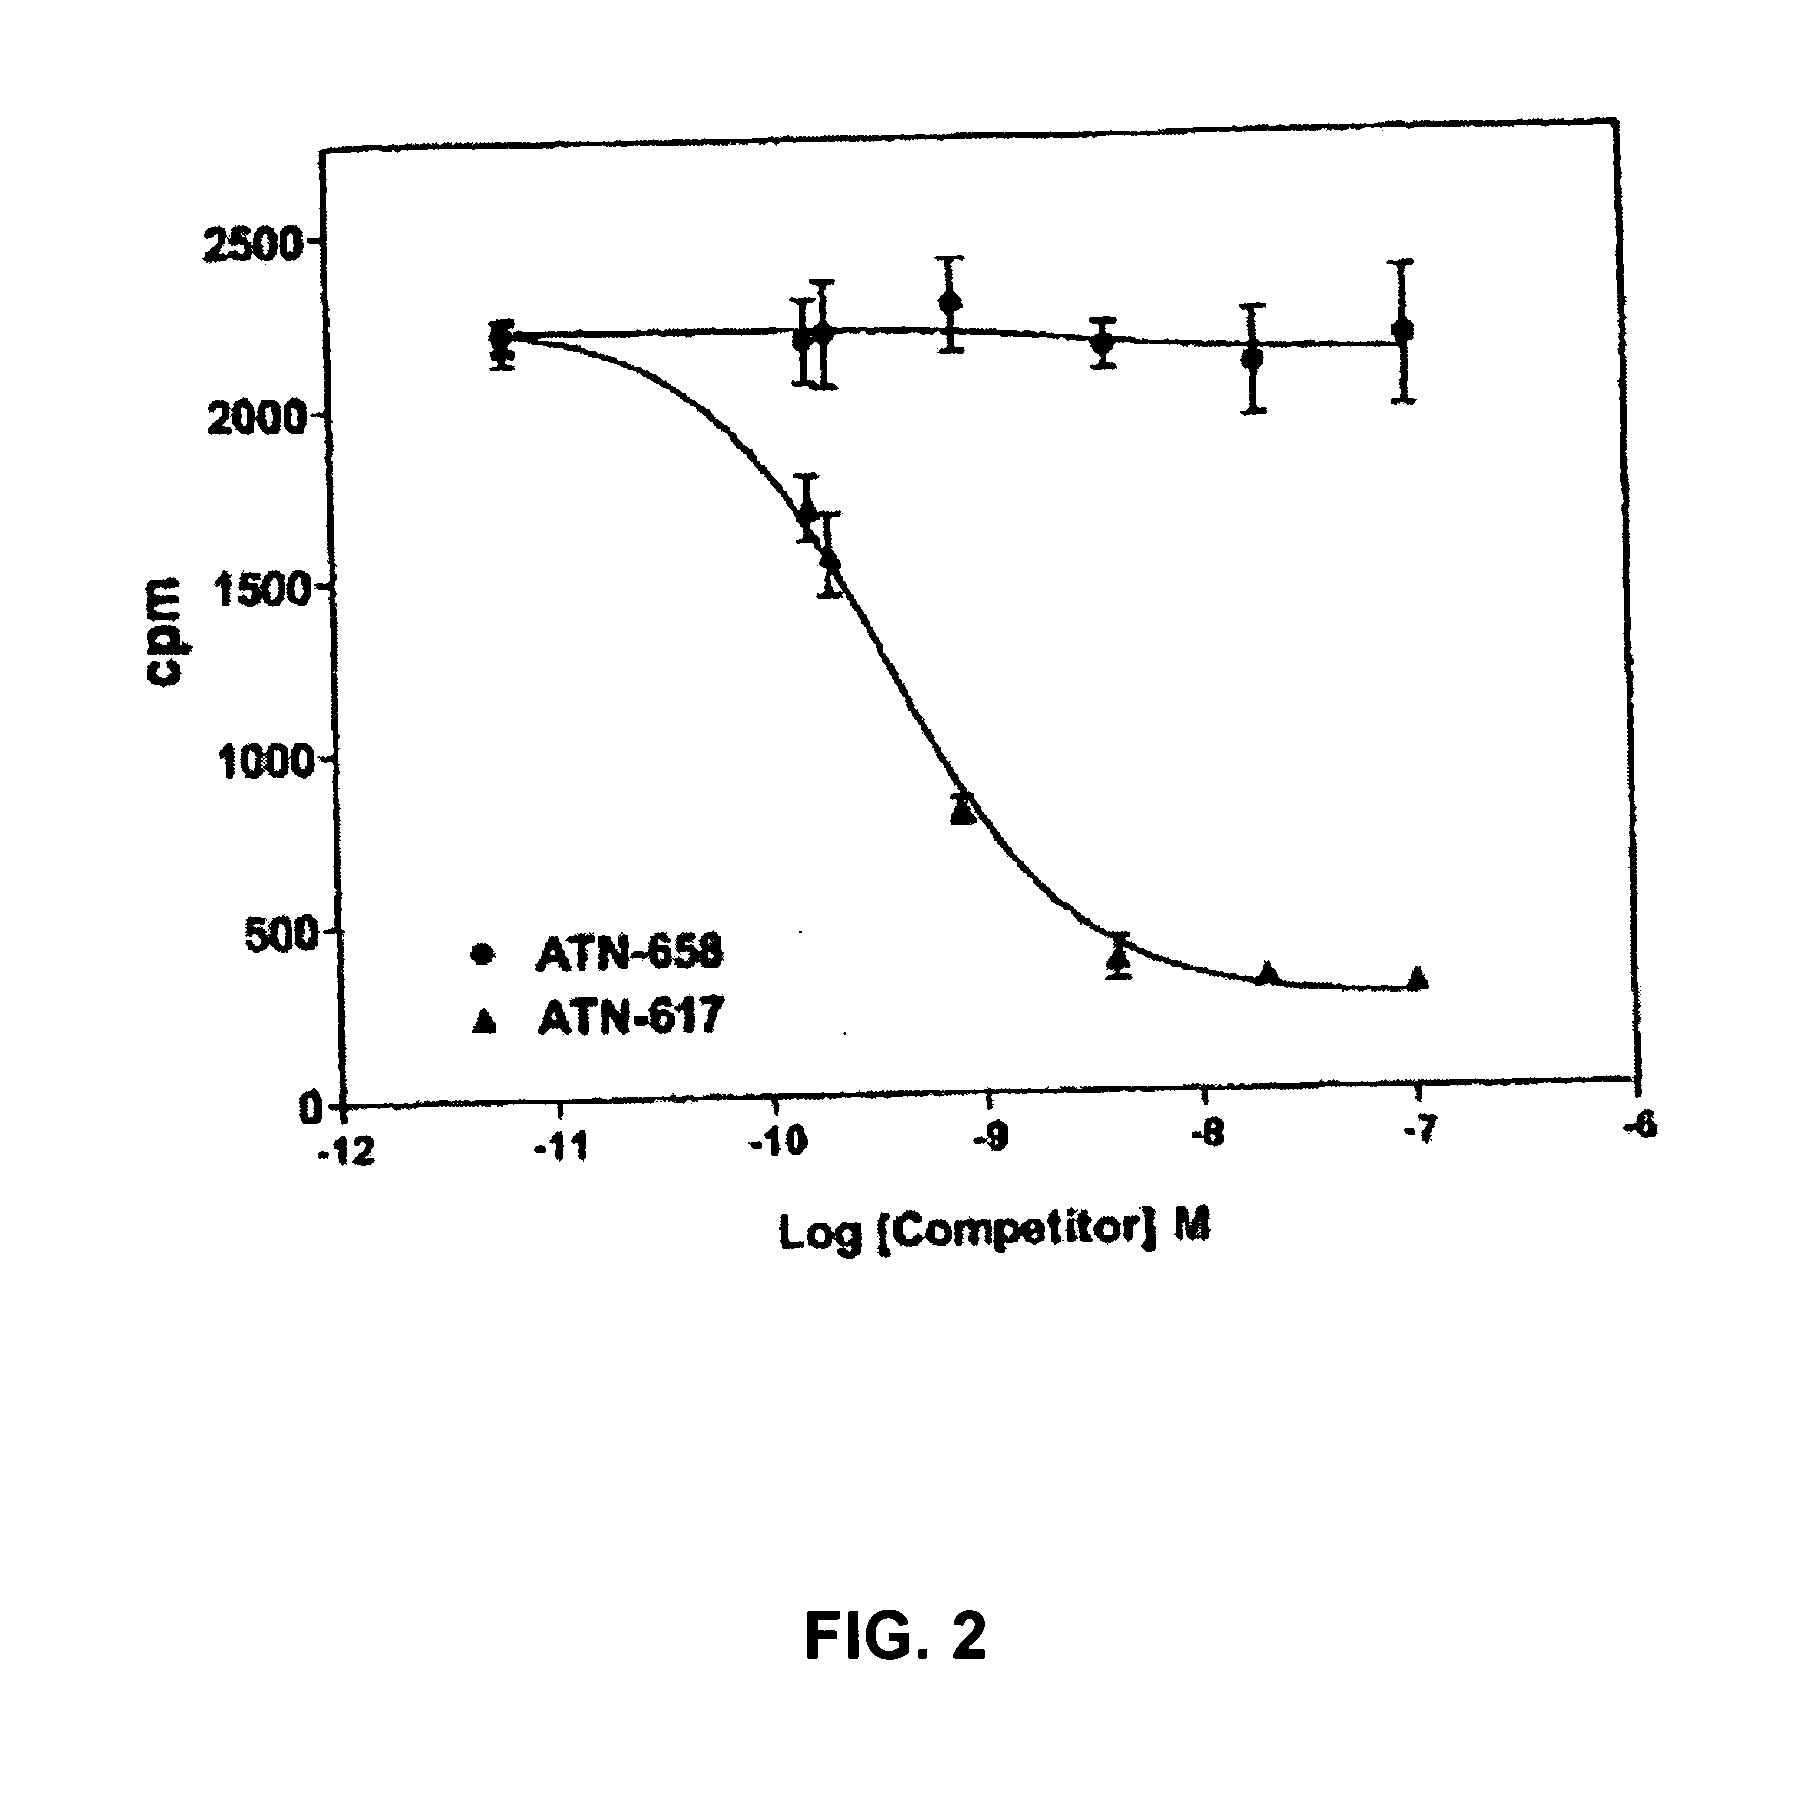 Urokinase-type plasminogen activator receptor epitope, monoclonal antibodies derived therefrom and methods of use thereof